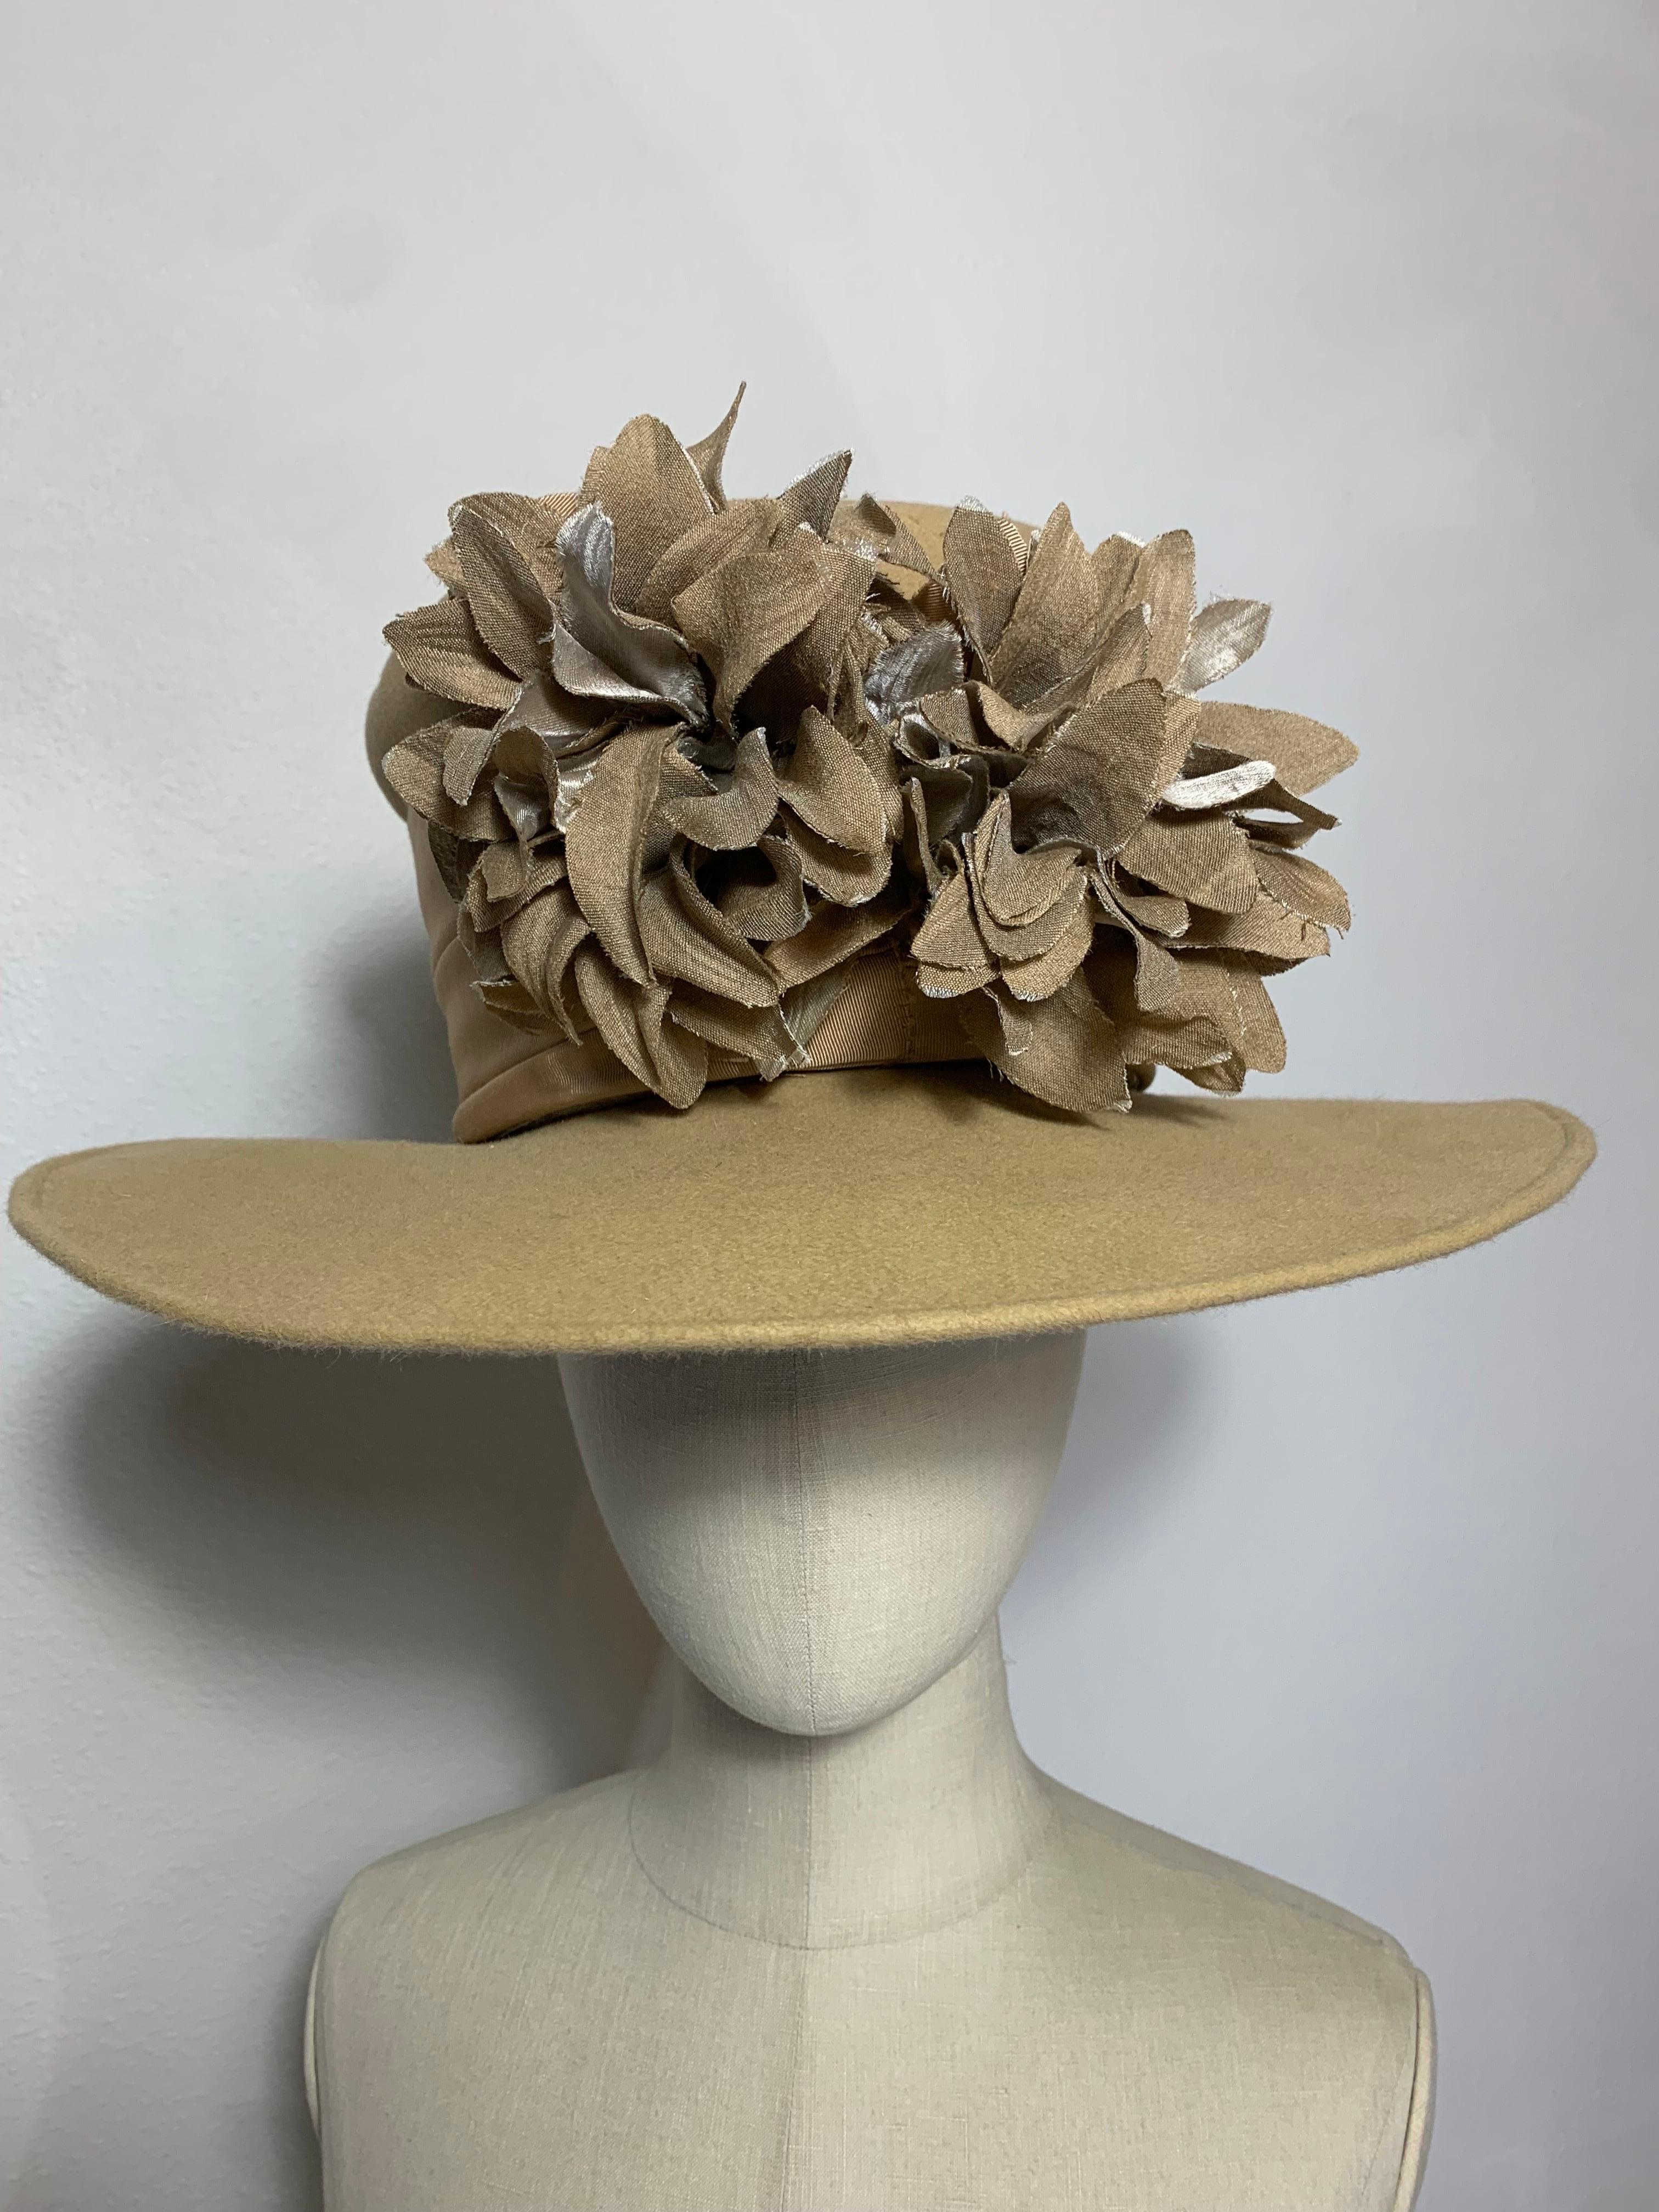 Maison Michel Autumn/Winter Medium Brim Fawn Felt  Beautifully Blocked High Top Hat with Matching Flowers and Wide Grosgrain Band: Unlabeled, with attached combs for securing. Size 7 Medium. Made in France. 

Please visit our 1stDibs Store for many